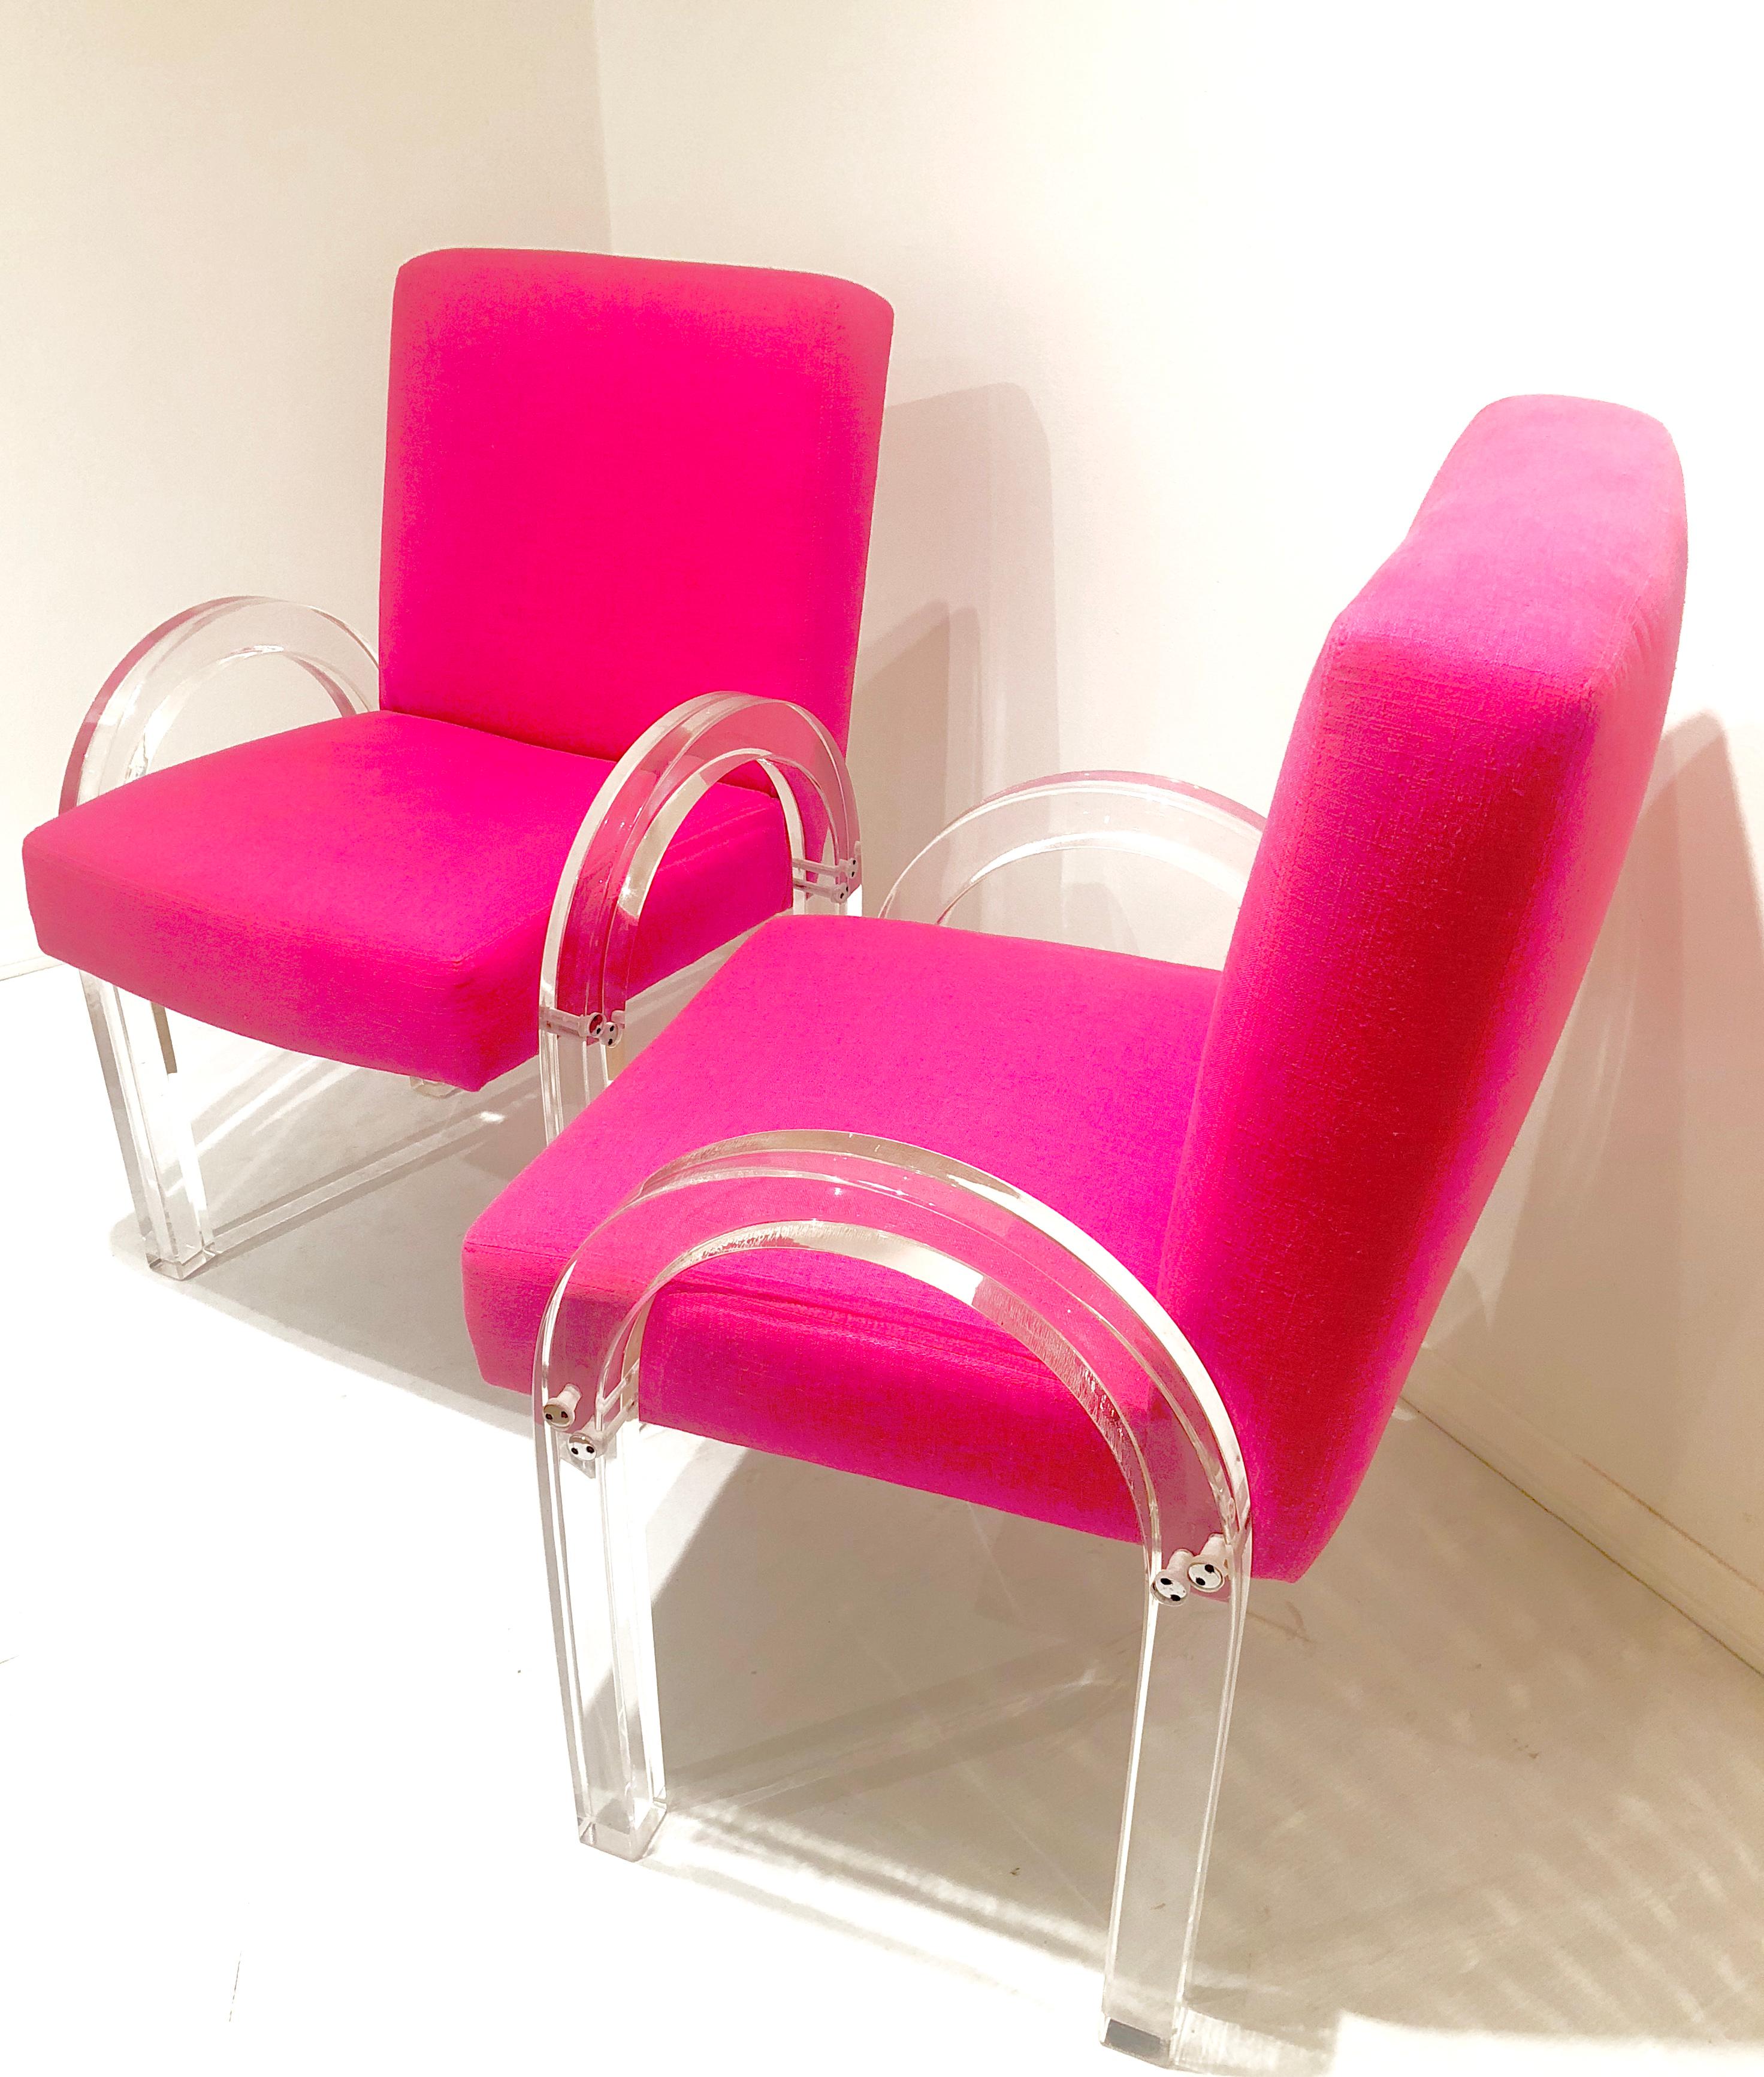 Beautiful pair of Archline Lucite armchairs. Designed by Charles Hollis Jones, circa 1980s. Freshly upholstered in a bright Mexican fuscia linen material. The arms have been polished and they have new foam. These pair of chairs are chic and elegant.